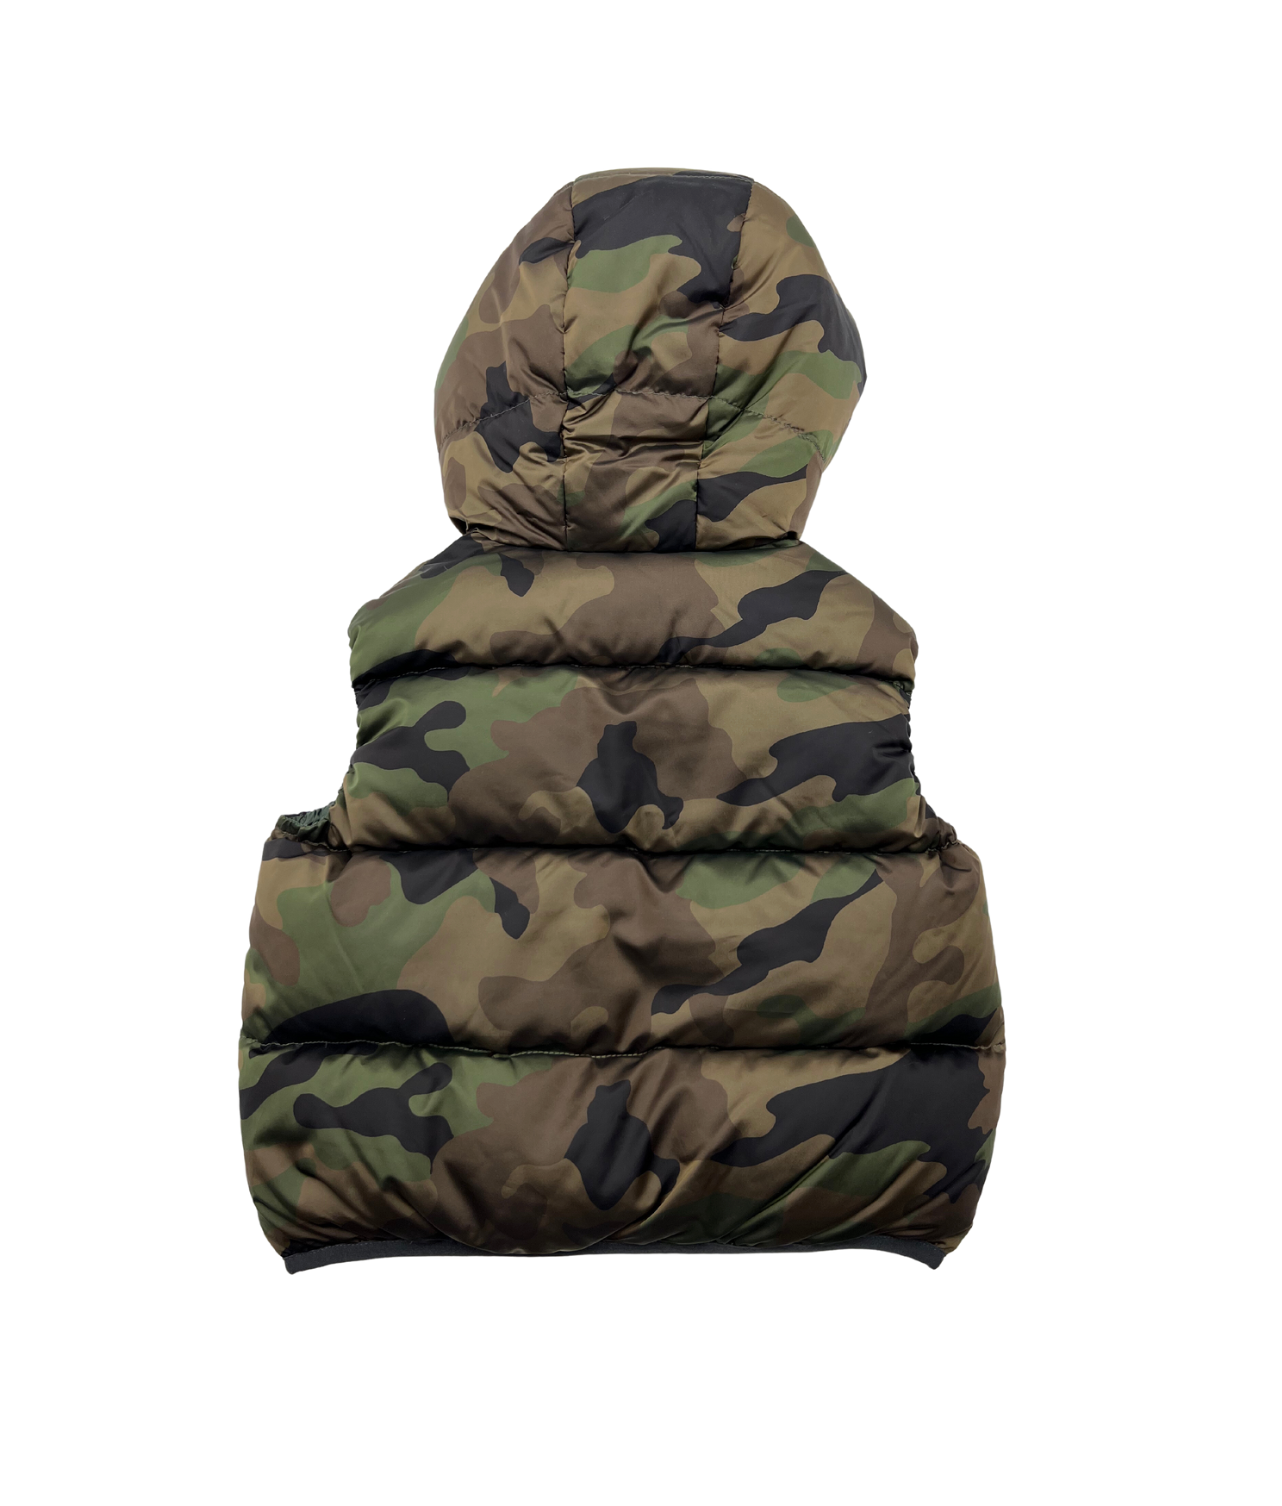 IL GUFO - Camouflage sleeveless down jacket - 2 years old